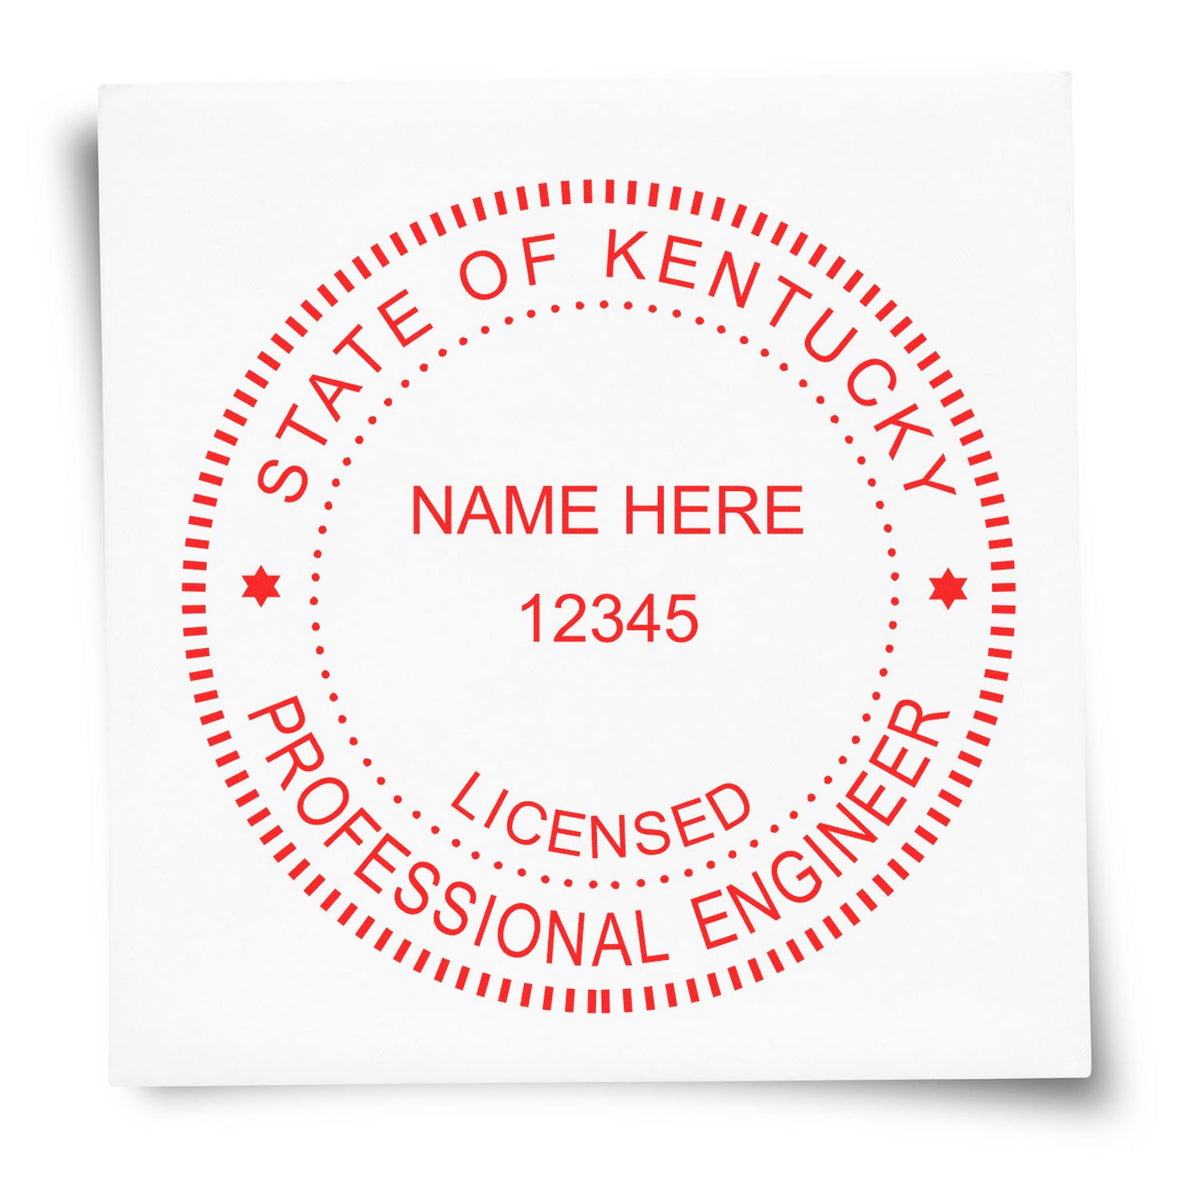 A photograph of the Self-Inking Kentucky PE Stamp stamp impression reveals a vivid, professional image of the on paper.